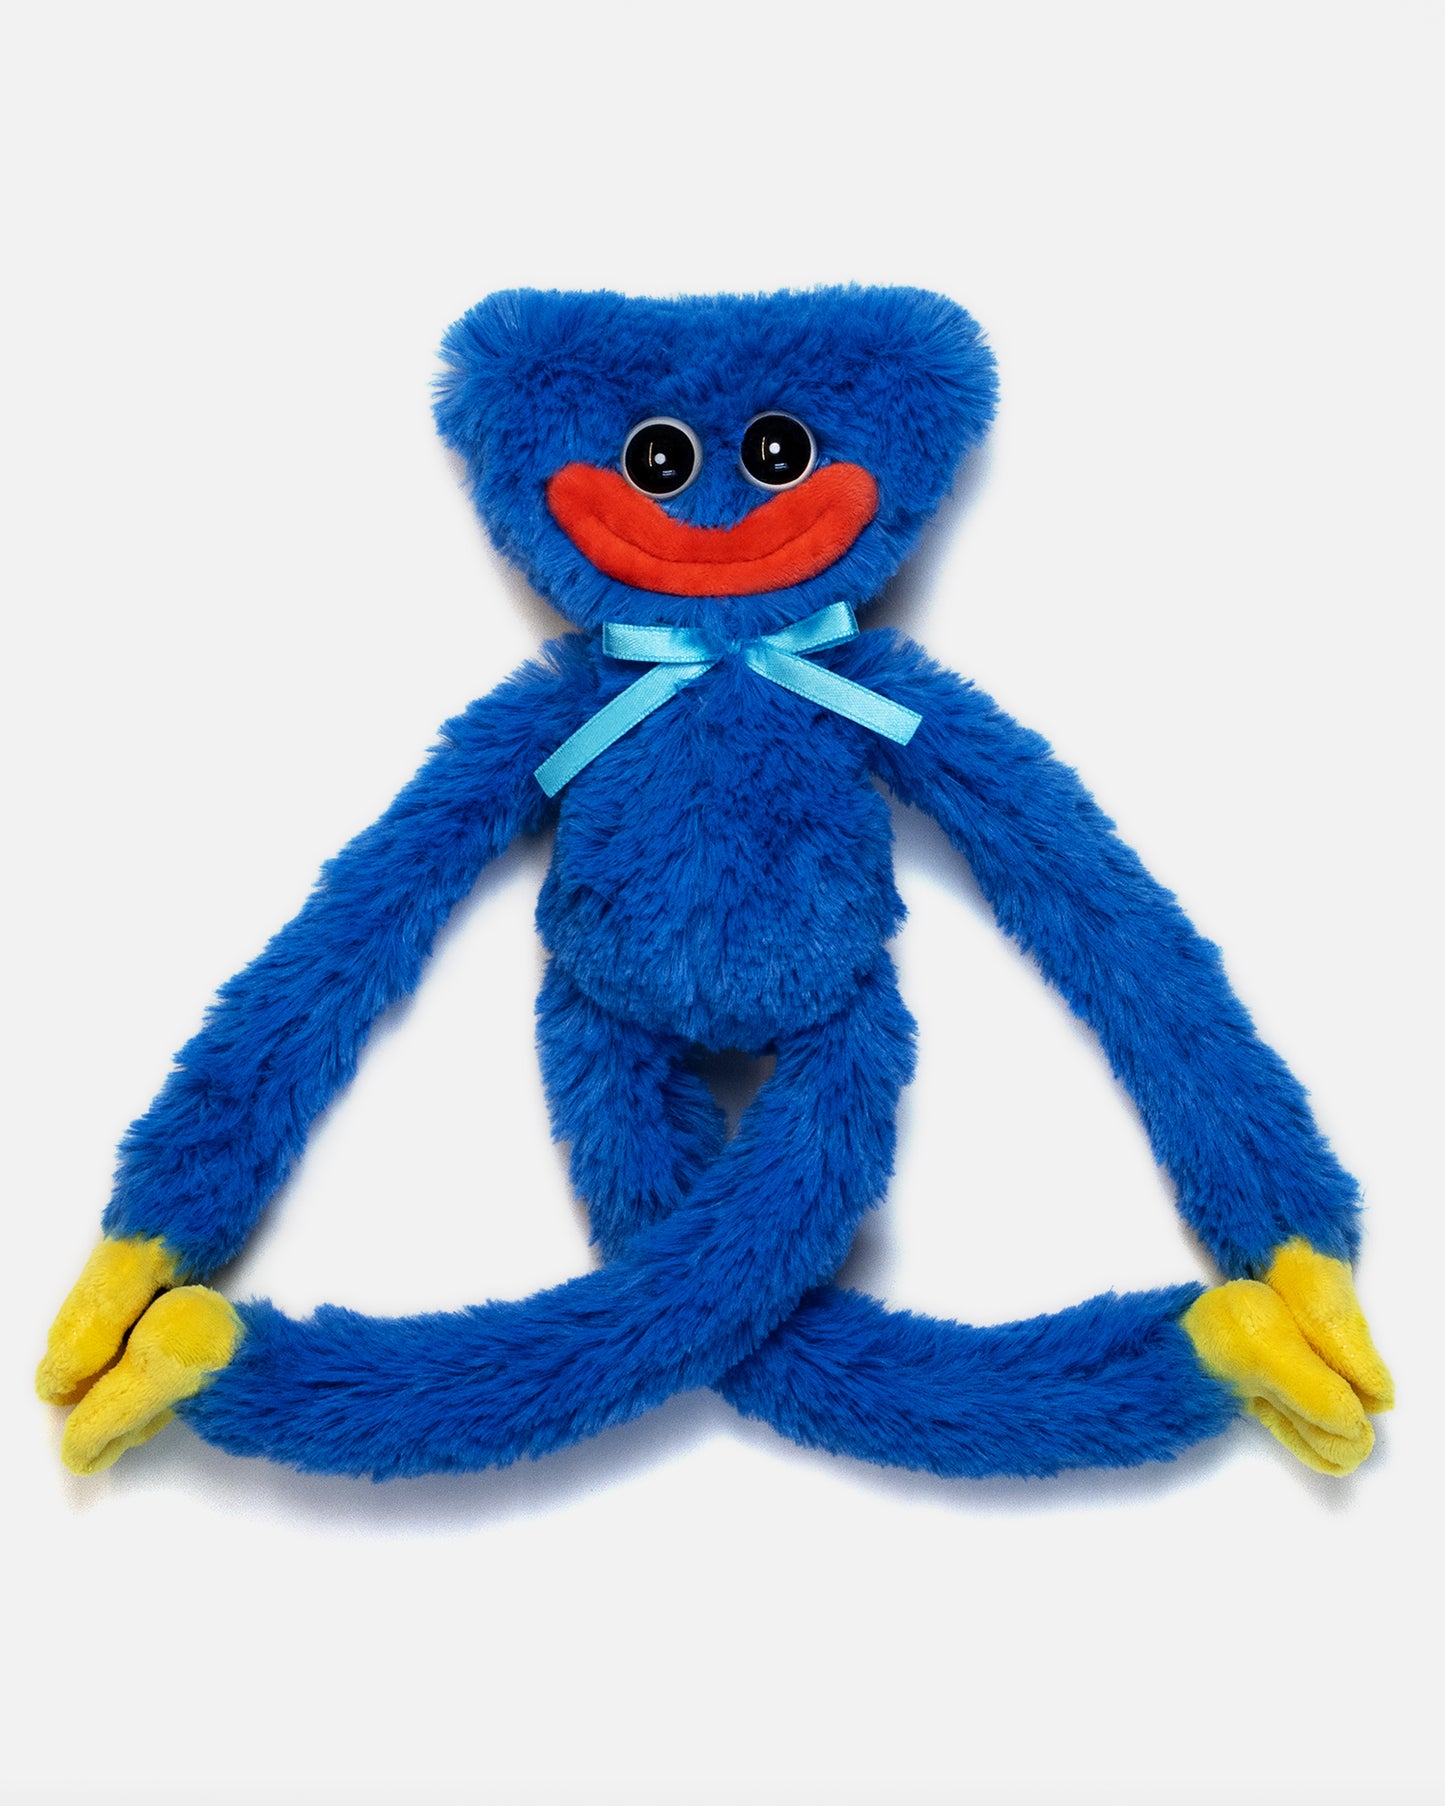 smiling huggy wuggy poppy playtime 14" plush front. hands and feet velcro together.